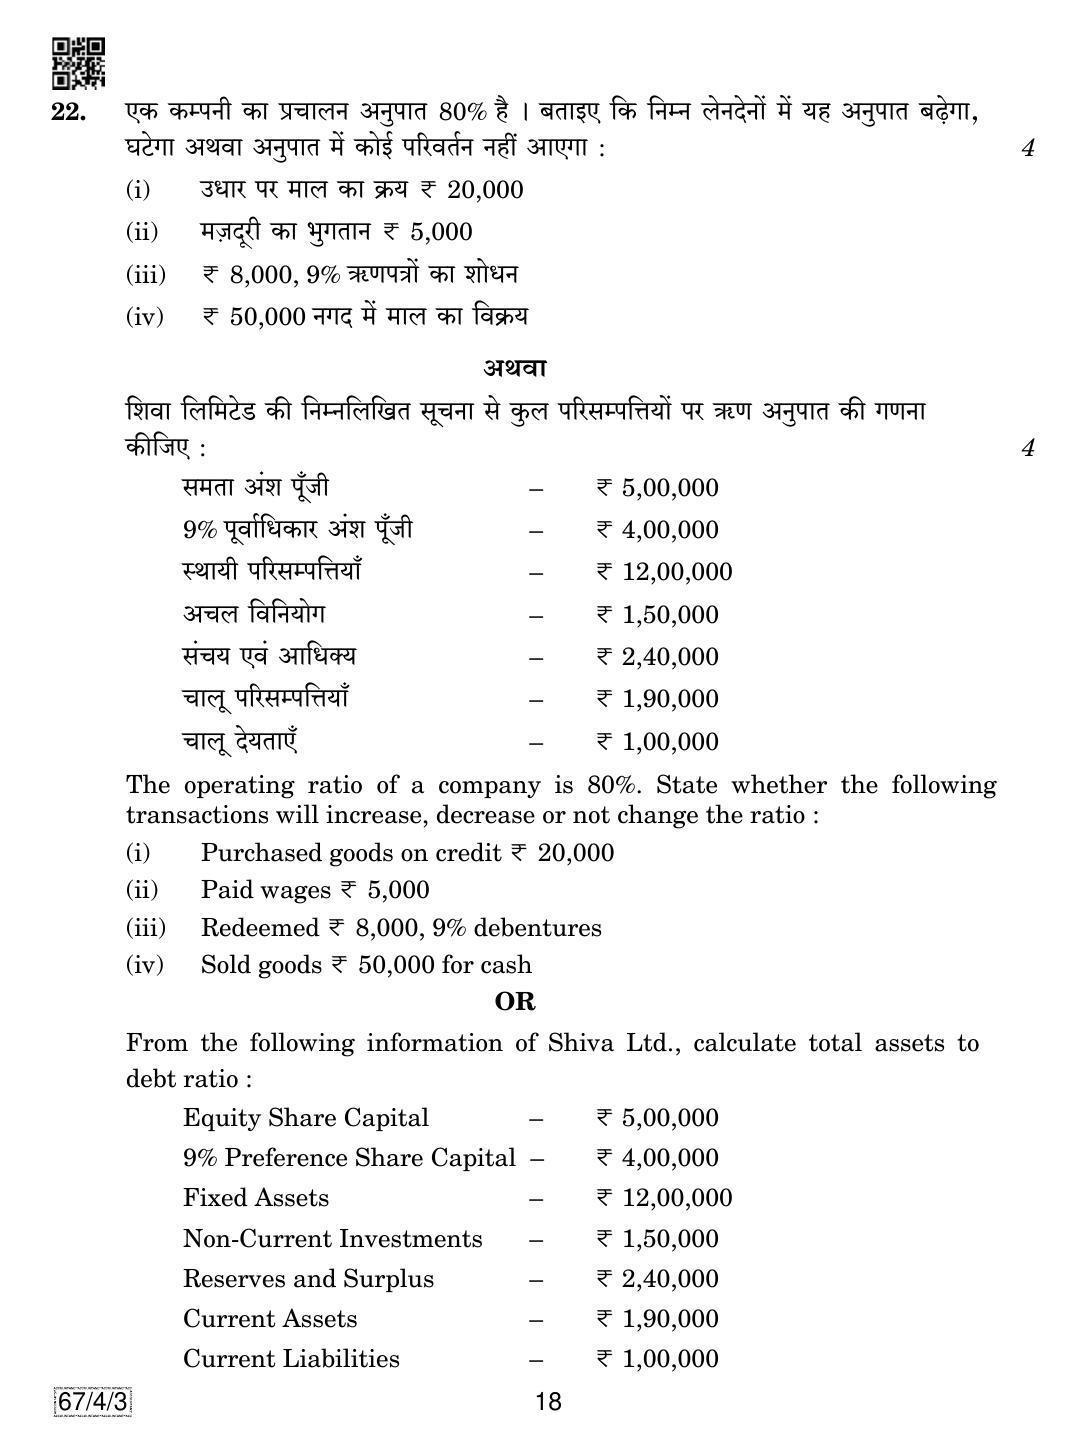 CBSE Class 12 67-4-3 Accountancy 2019 Question Paper - Page 18